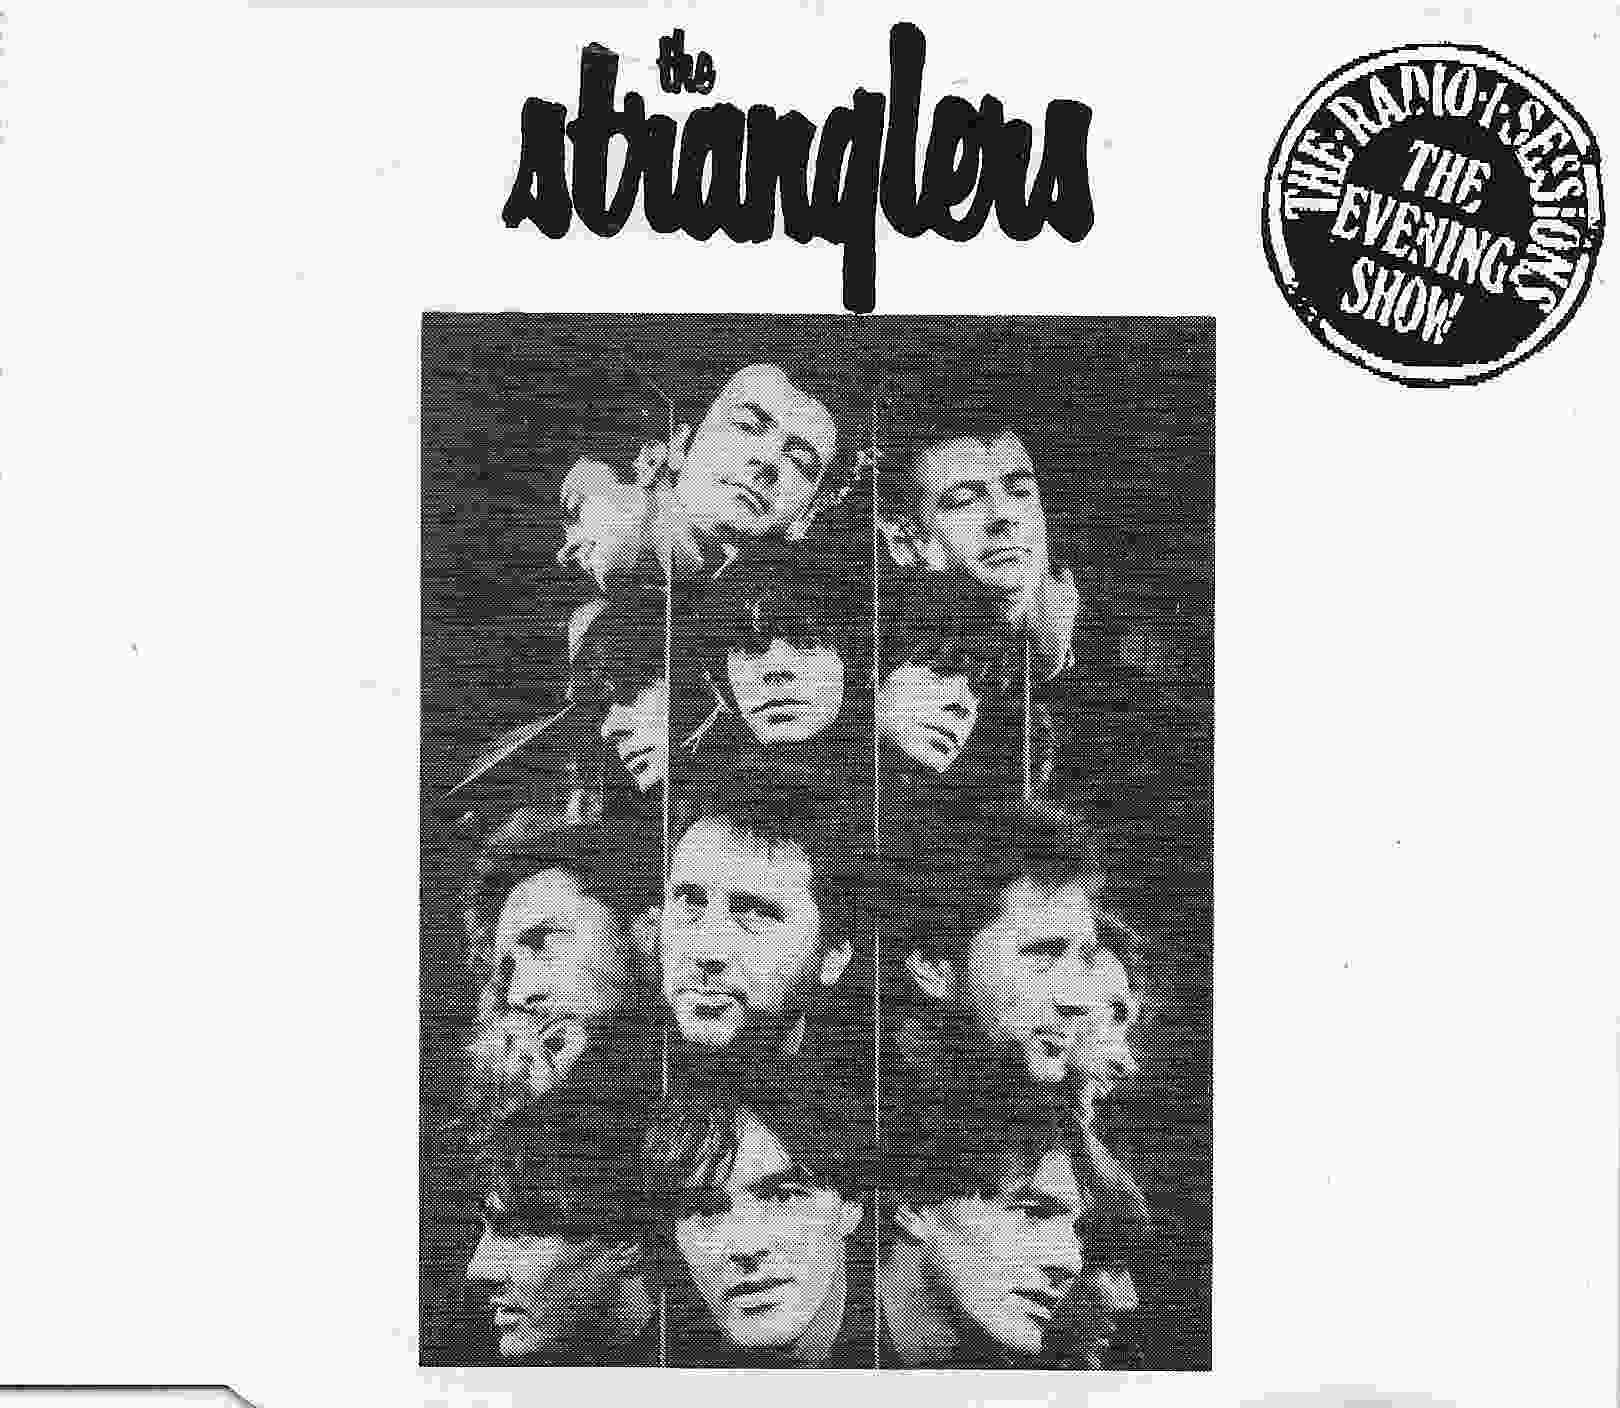 Picture of The Radio 1 sessions - The evening show by artist The Stranglers  from The Stranglers cdsingles